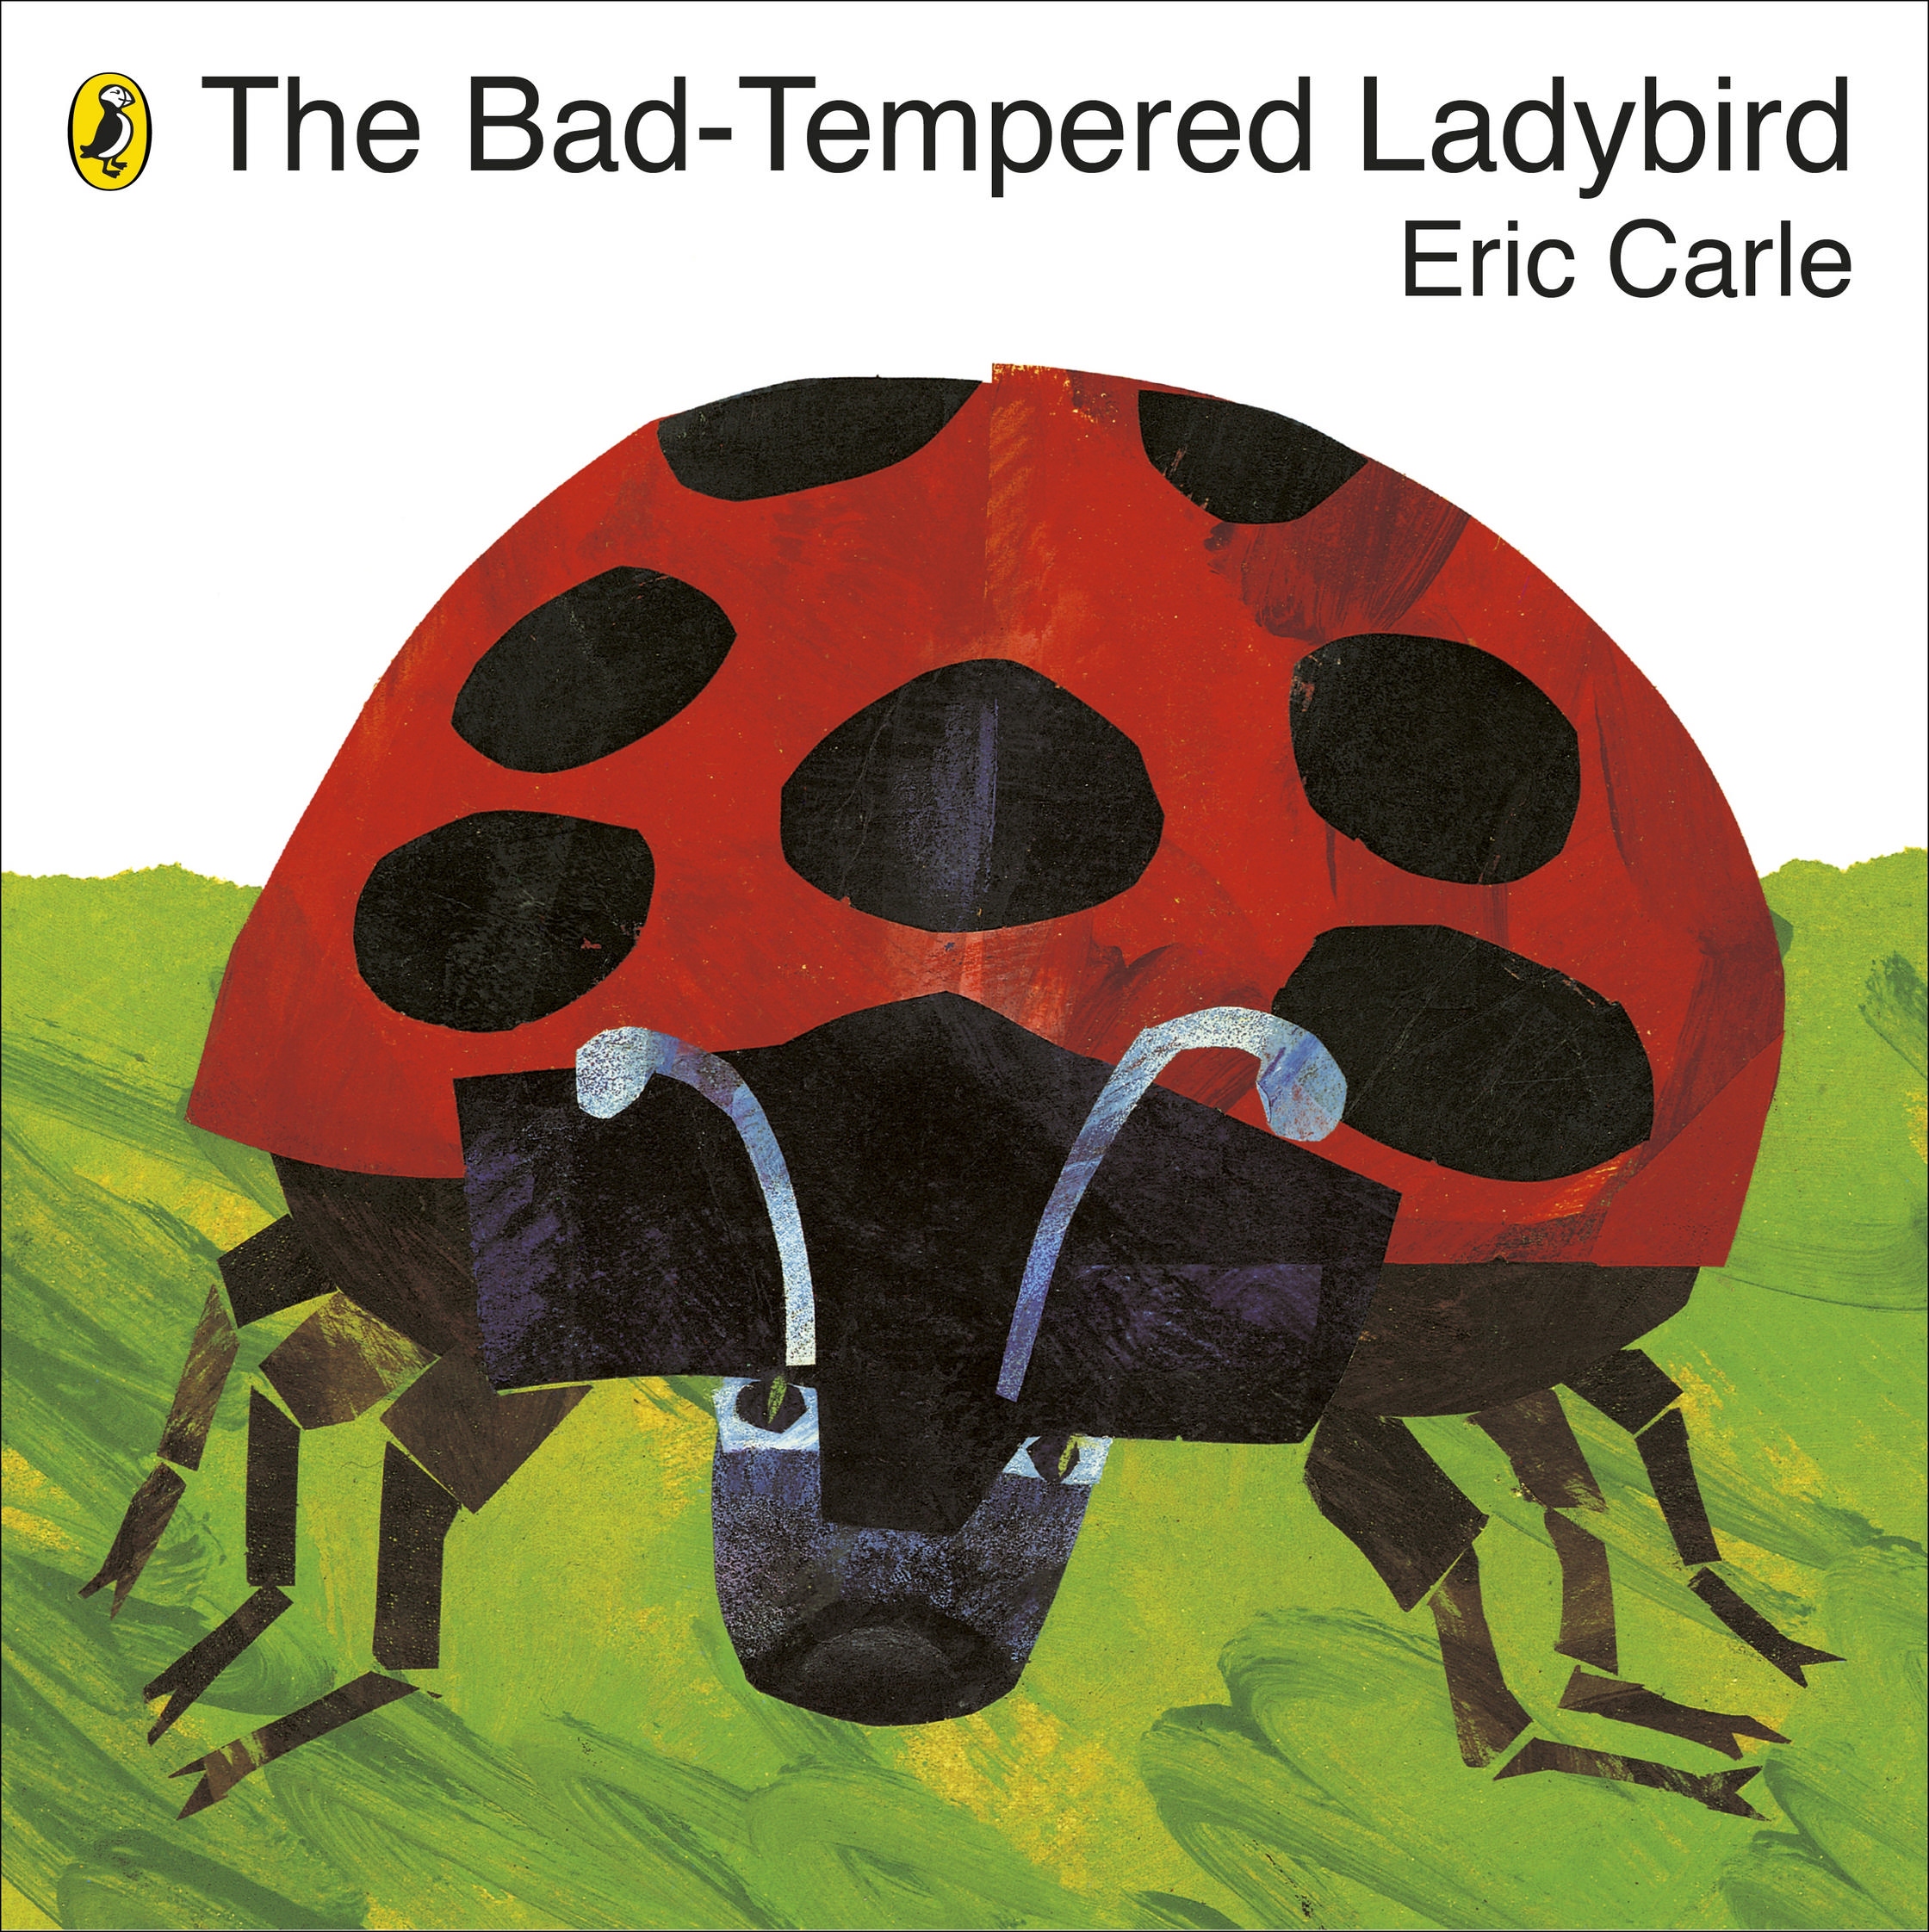 The bad tempered ladybird story